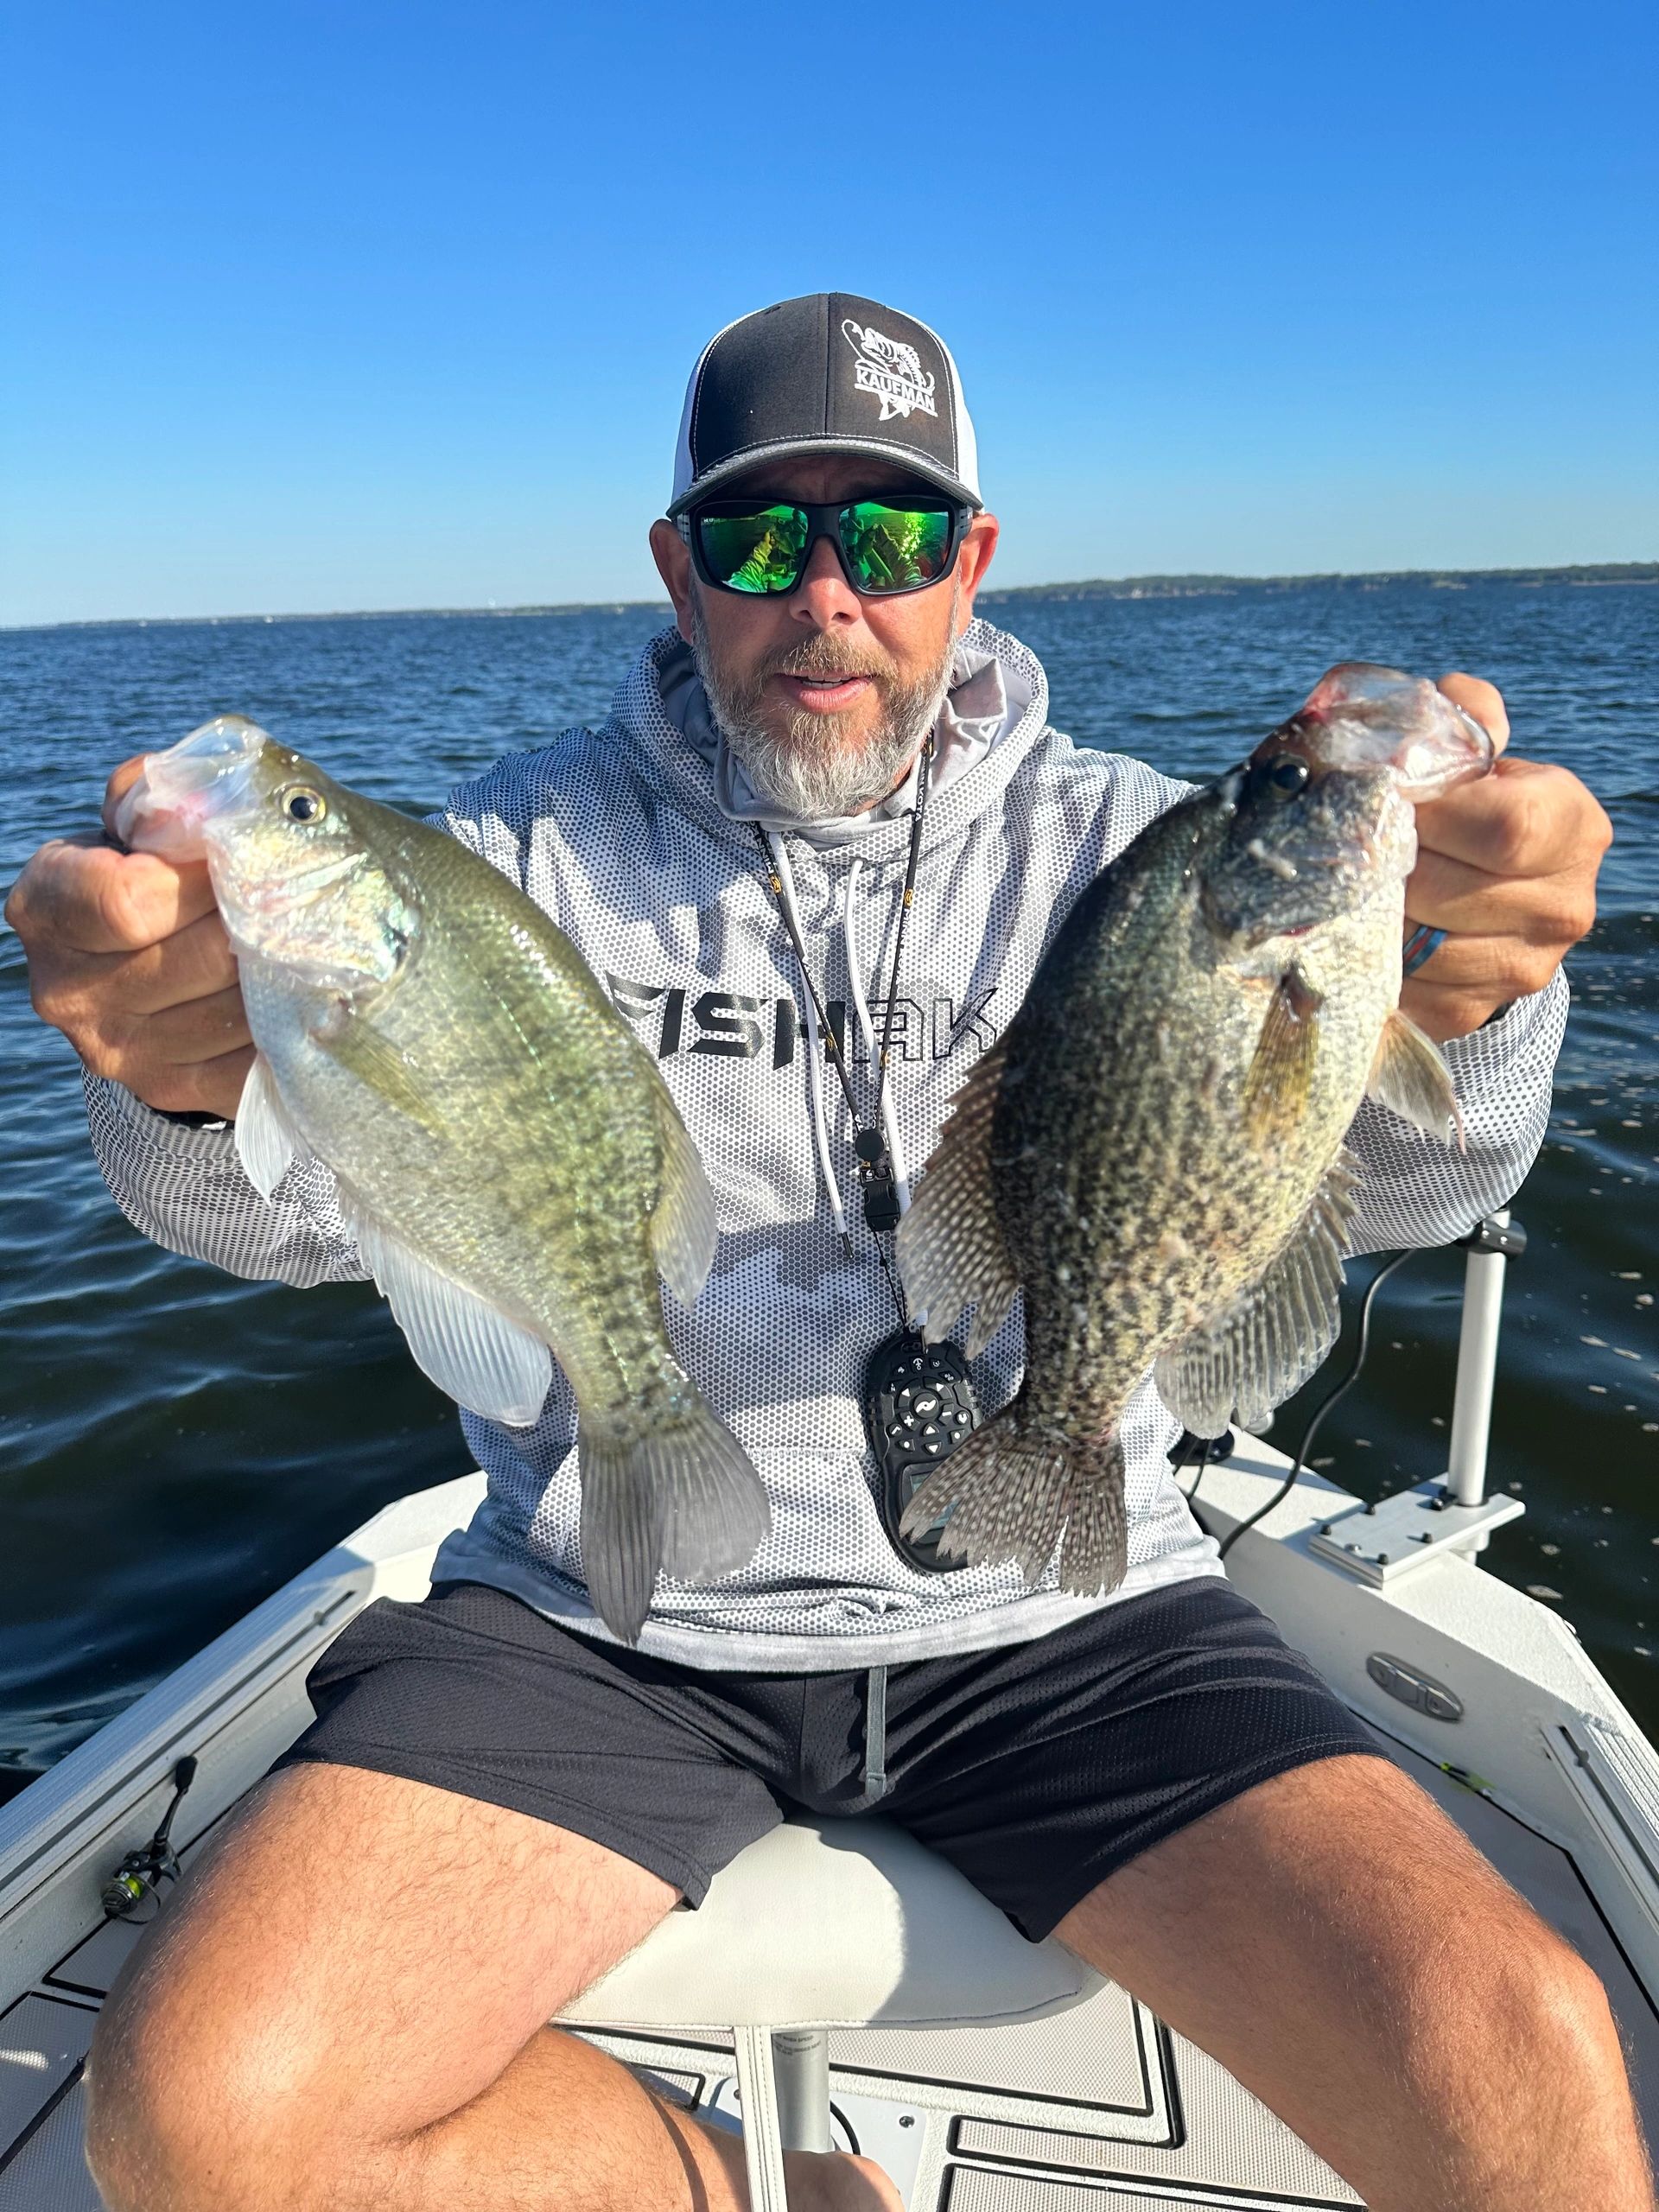 Fished with this crappie killer - Deano's Guide Service